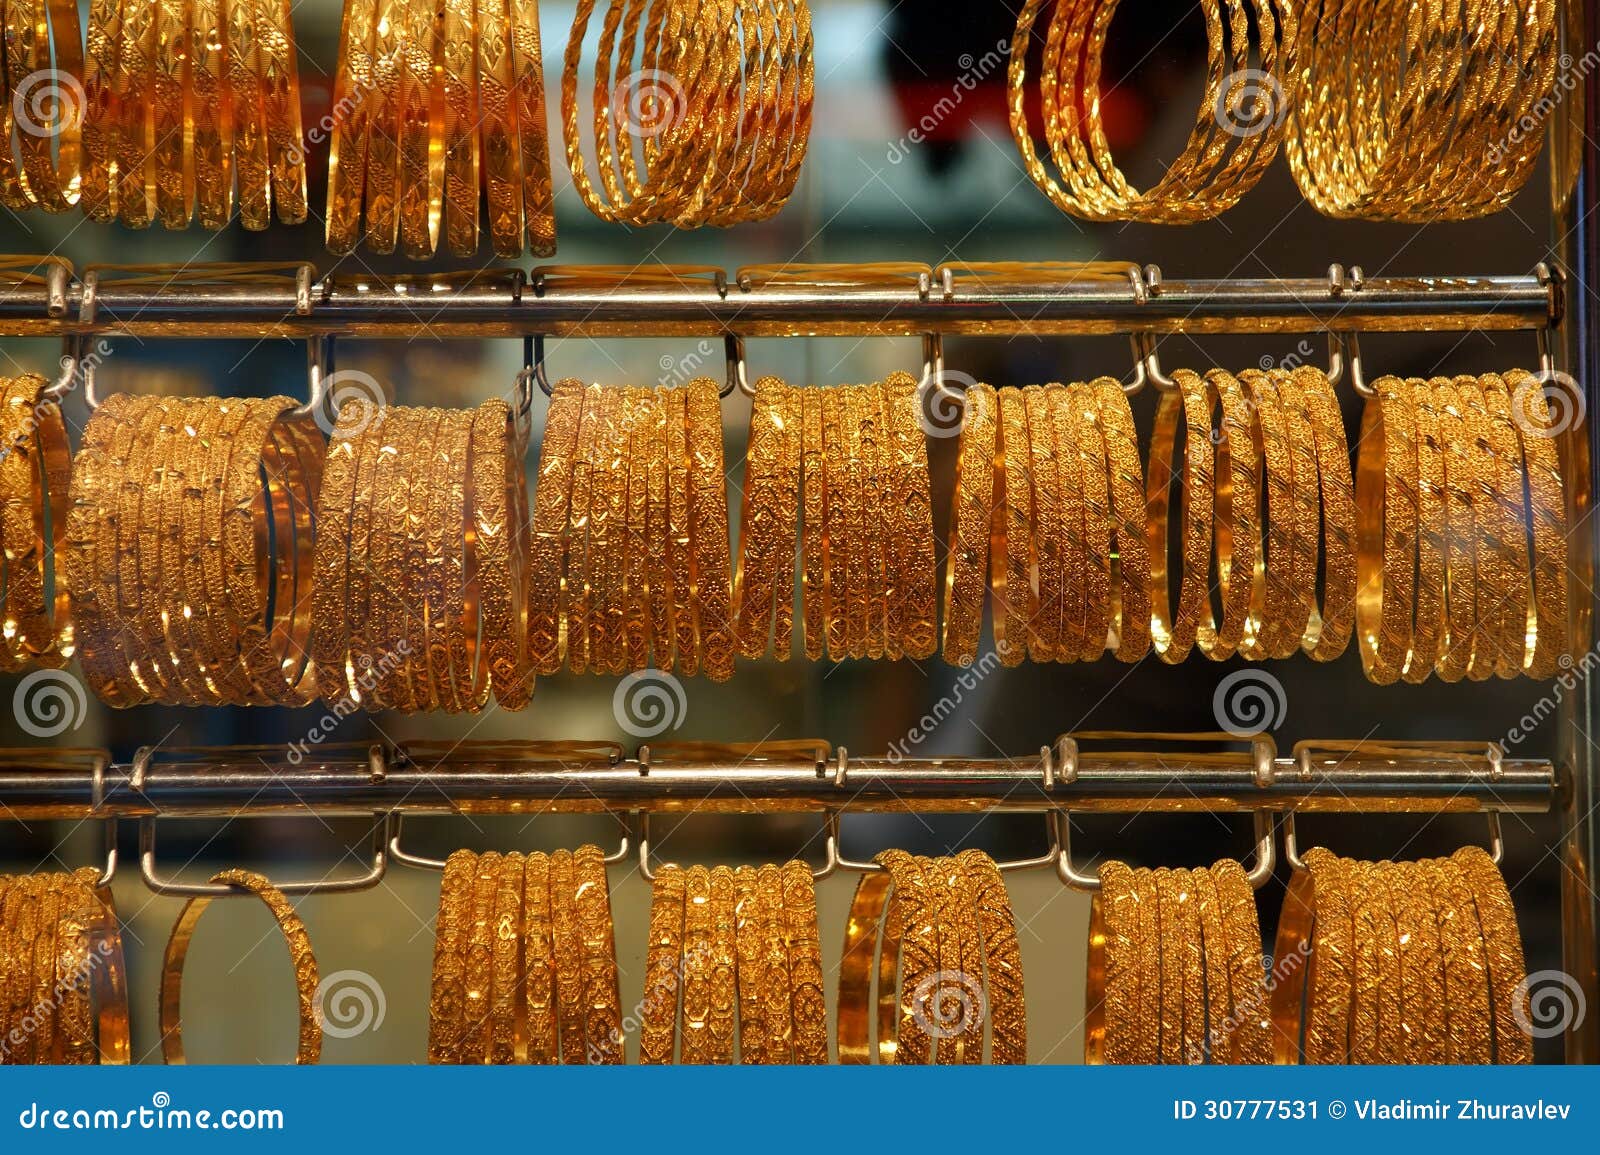 Gold Jewelry For Sale In The Market Stock Image - Image: 30777531